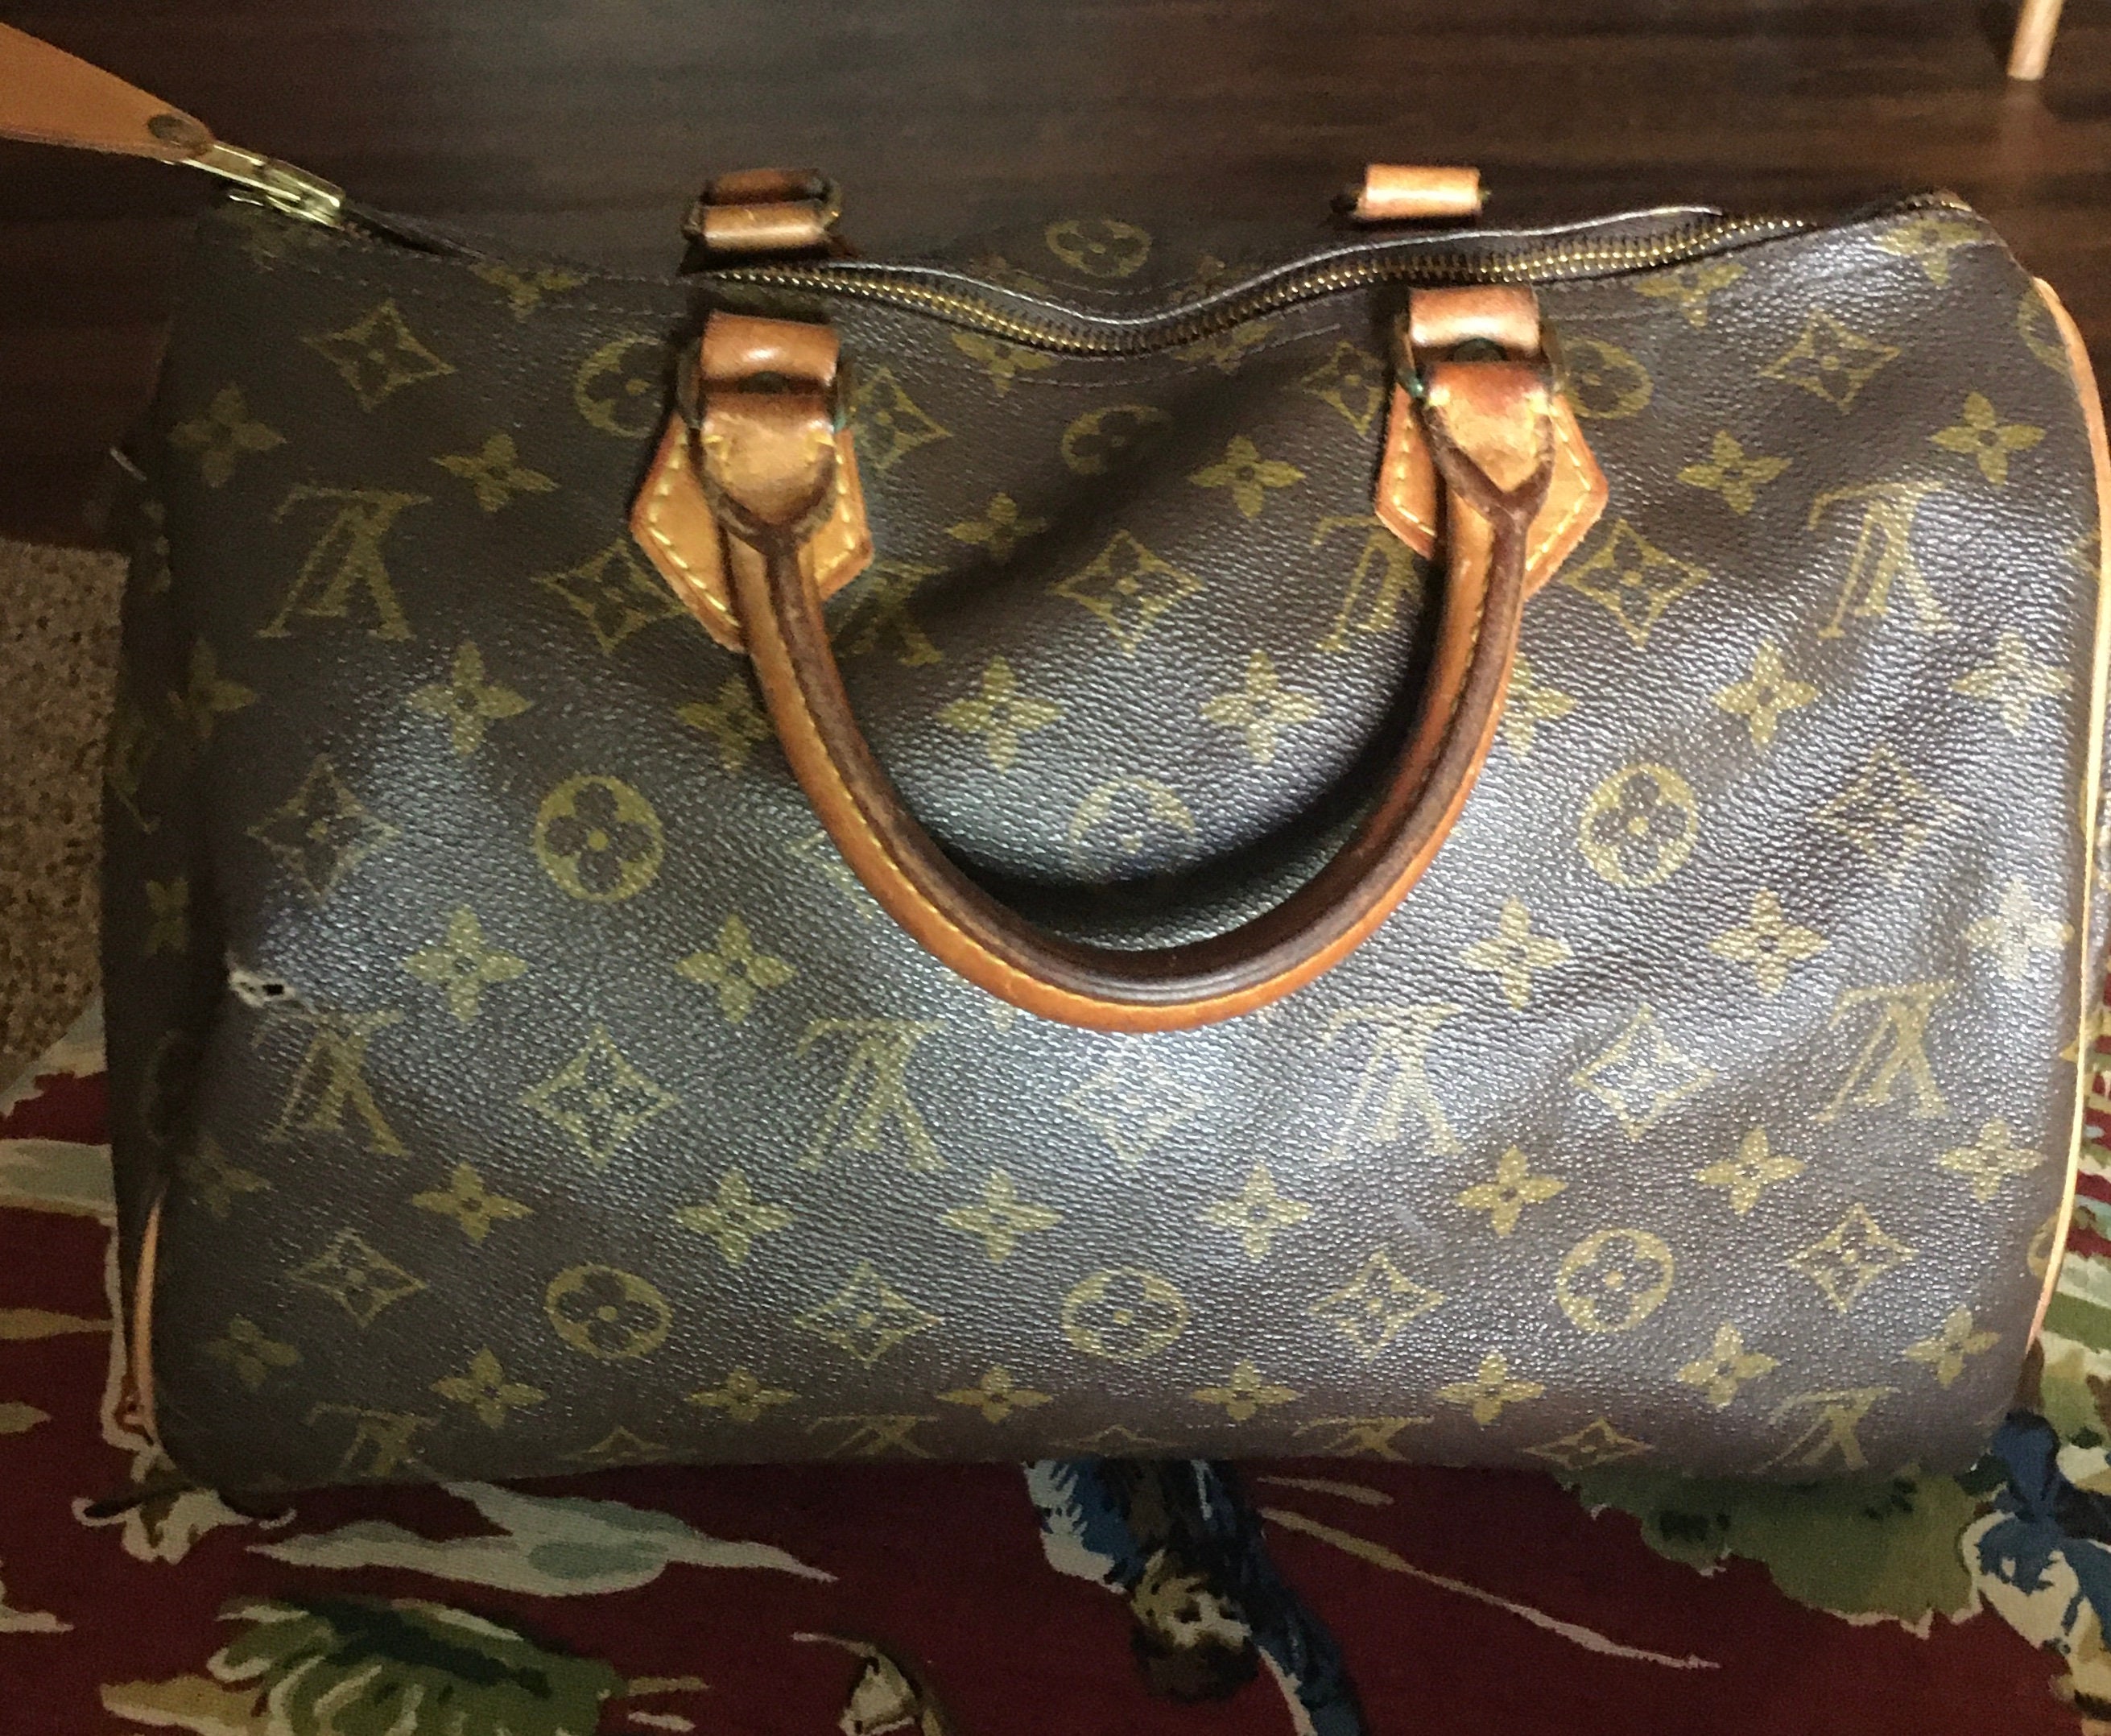 Authentic Louis Vuitton Classic Monogram and Red Calfskin Leather Pall –  Paris Station Shop